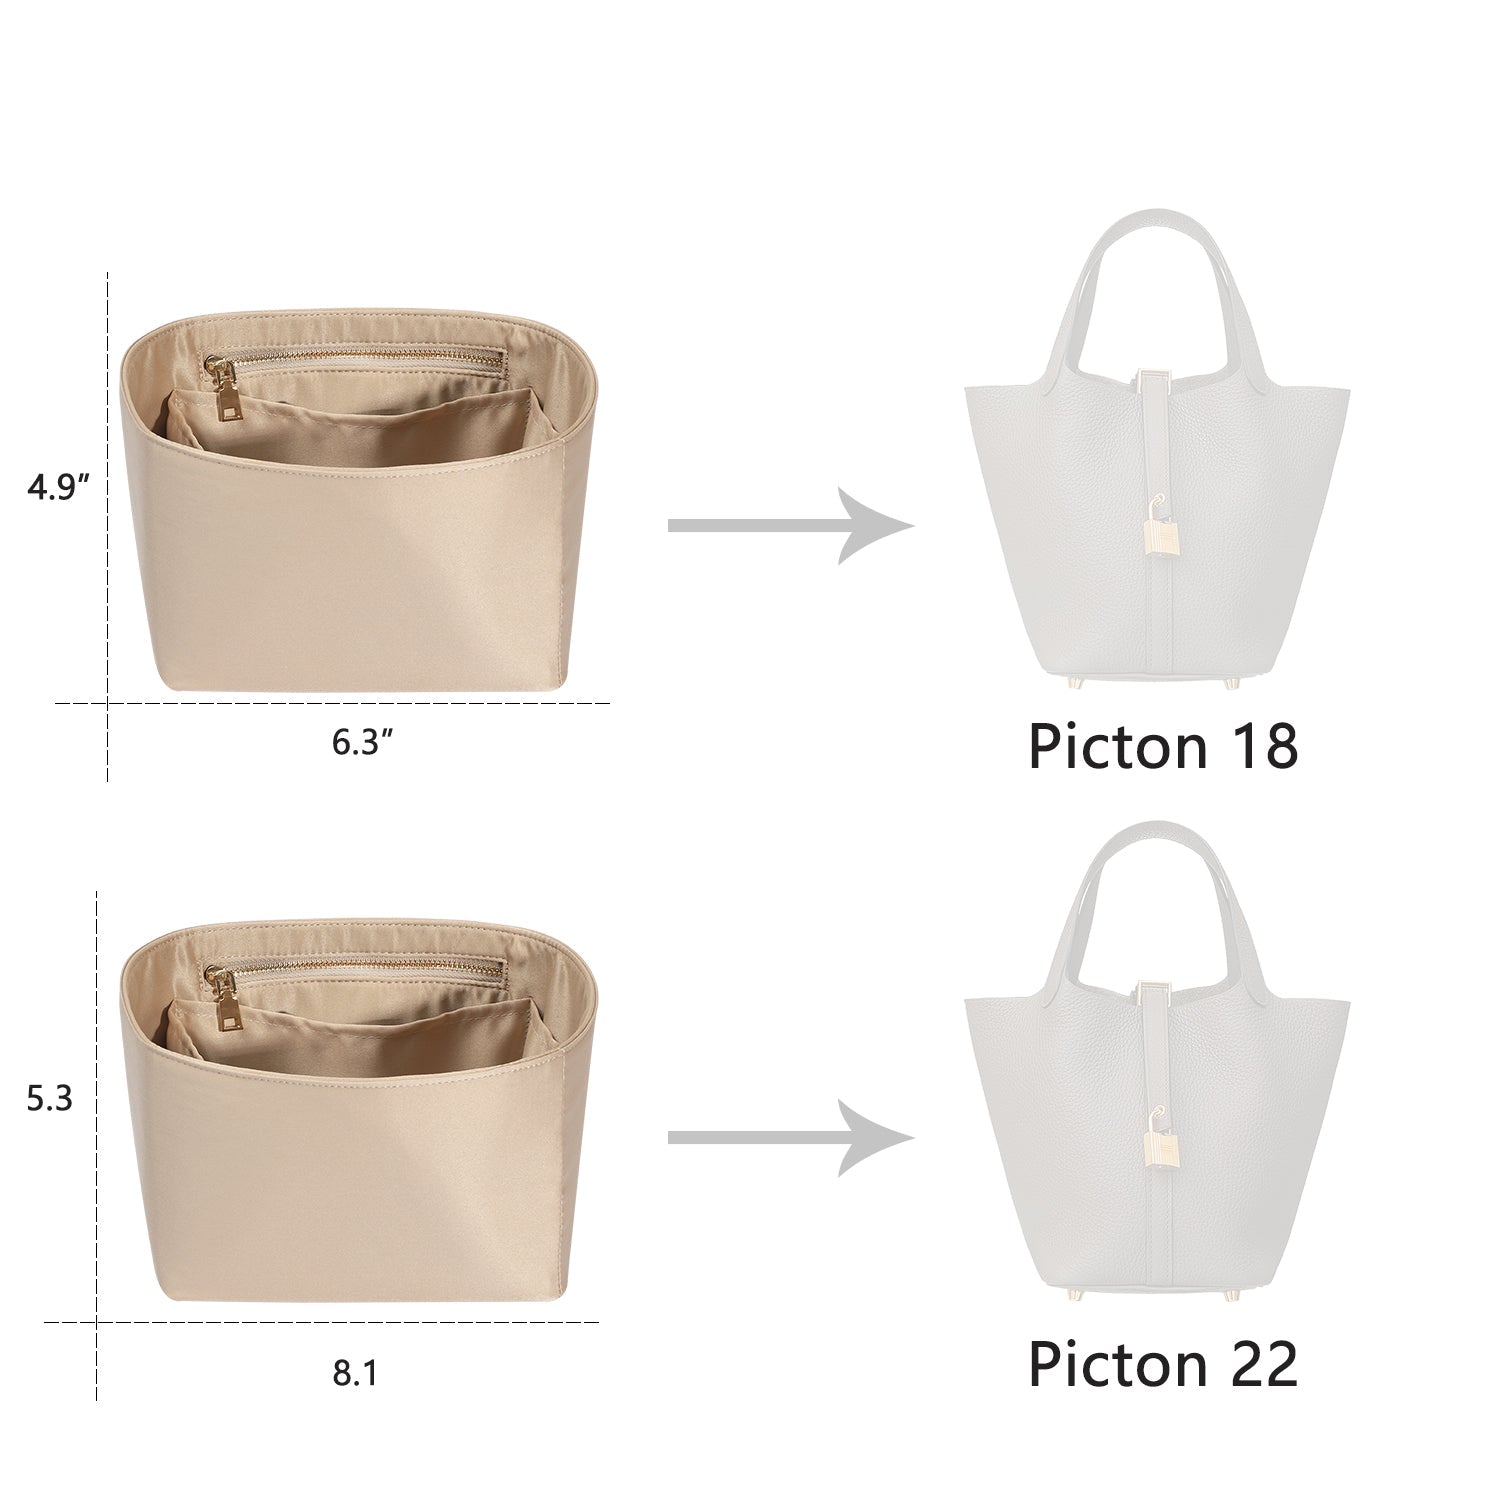 Luxurious Silky Purse Organizer for Hermes Picotin - Bag Insert Specifically Designed for the Luxury Tote, Smoothly Fits Picotin 18/22.